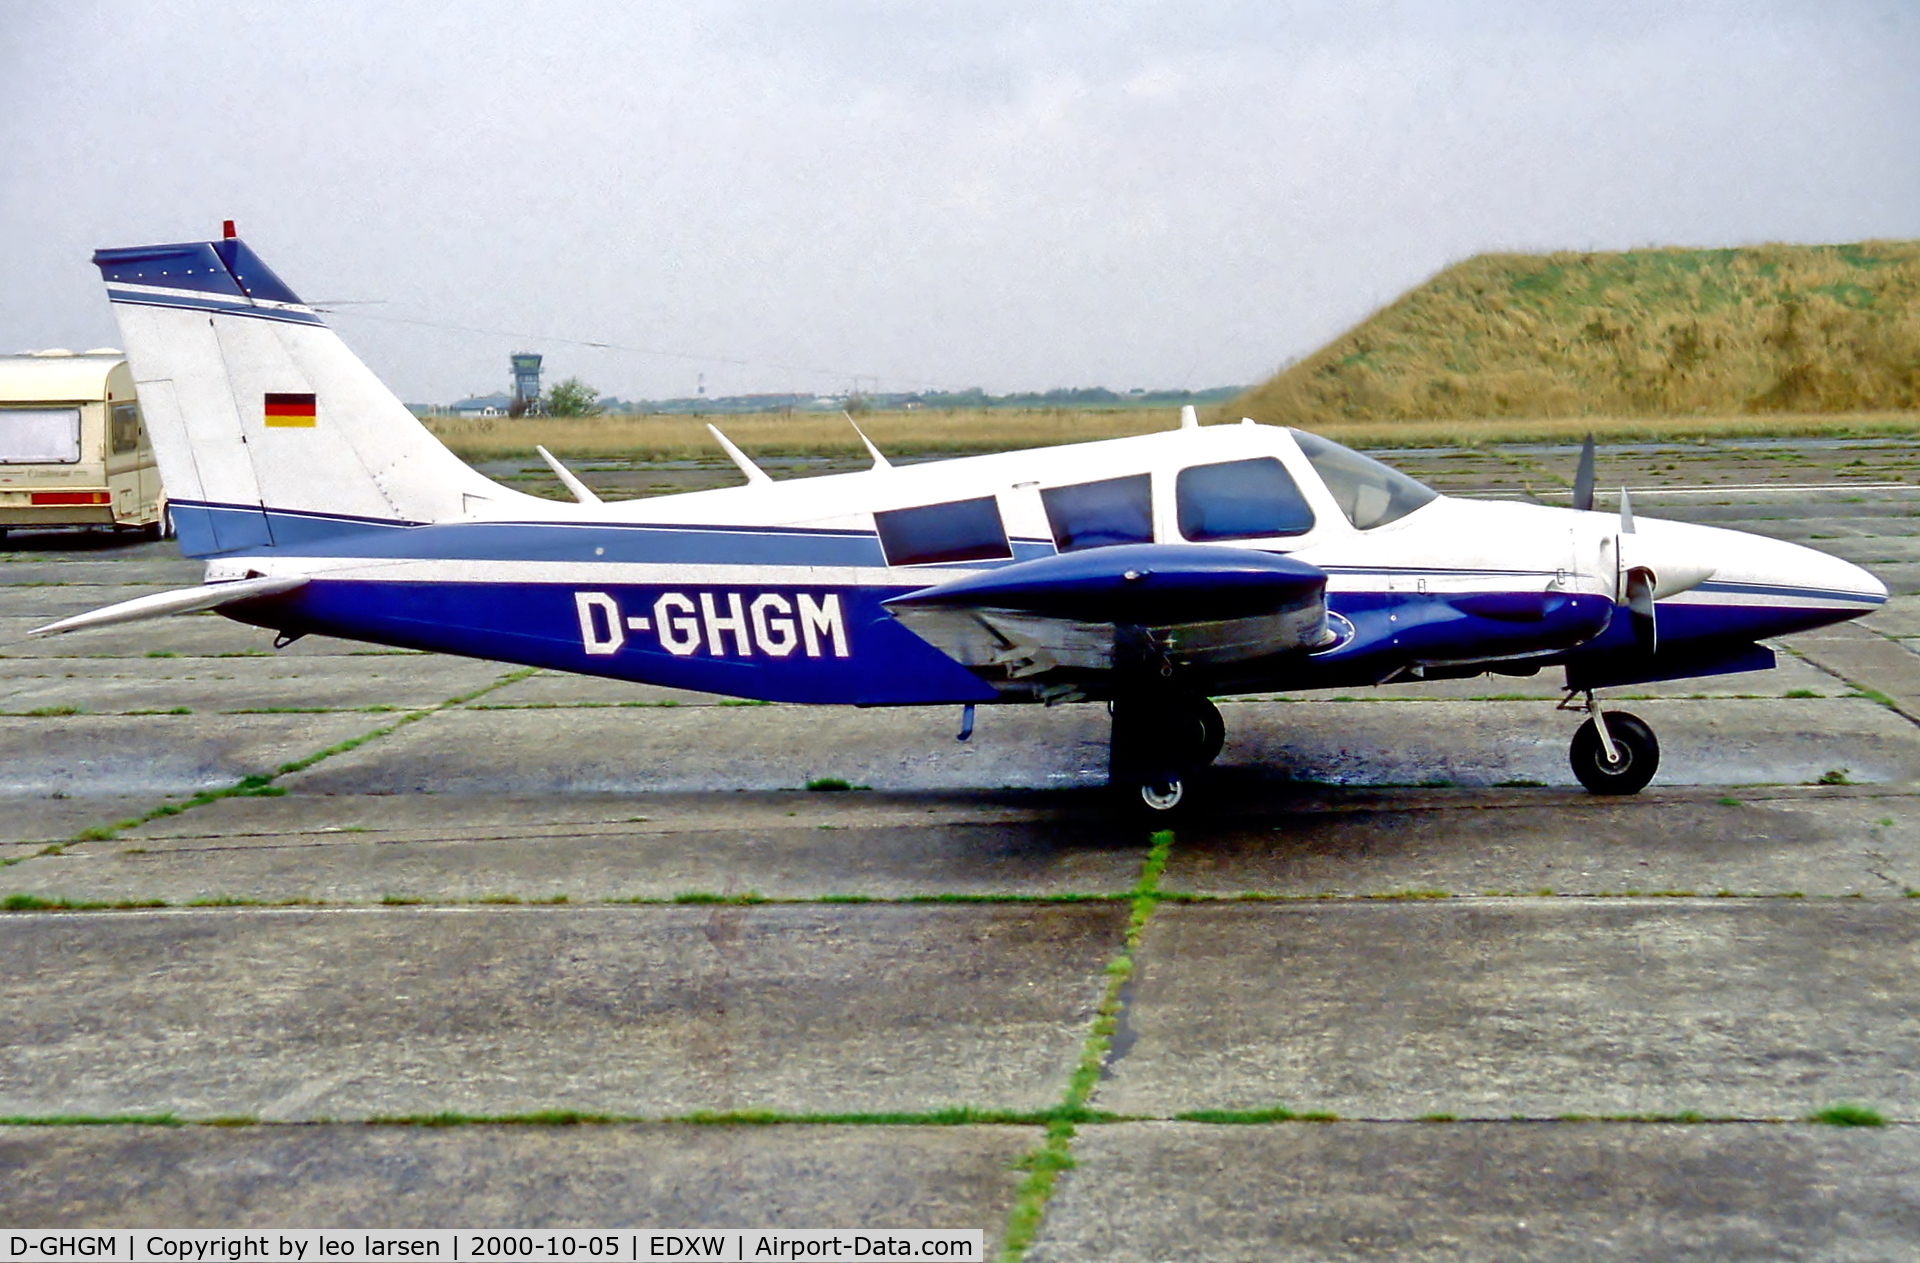 D-GHGM, Piper PA-34-200 C/N 34-7250157, Sylt Germany 5.10.00